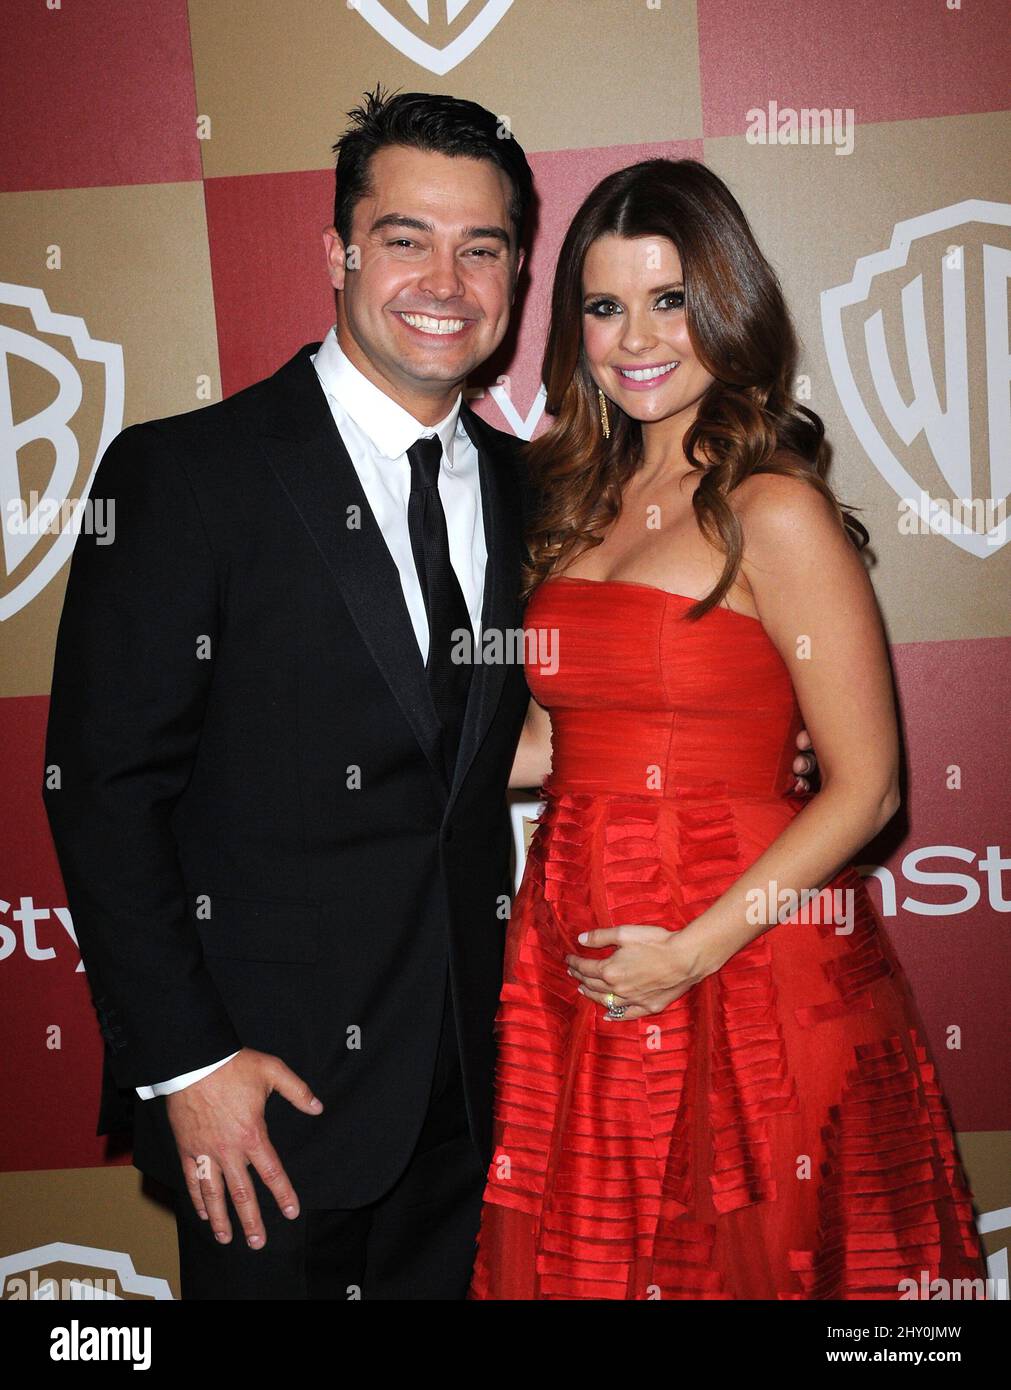 Nick Swisher and Joanna Garcia attending the 14th Annual Warner Bros. and InStyle Golden Globe Awards After Party held at the Beverly Hilton Hotel in Los Angeles, USA. Stock Photo